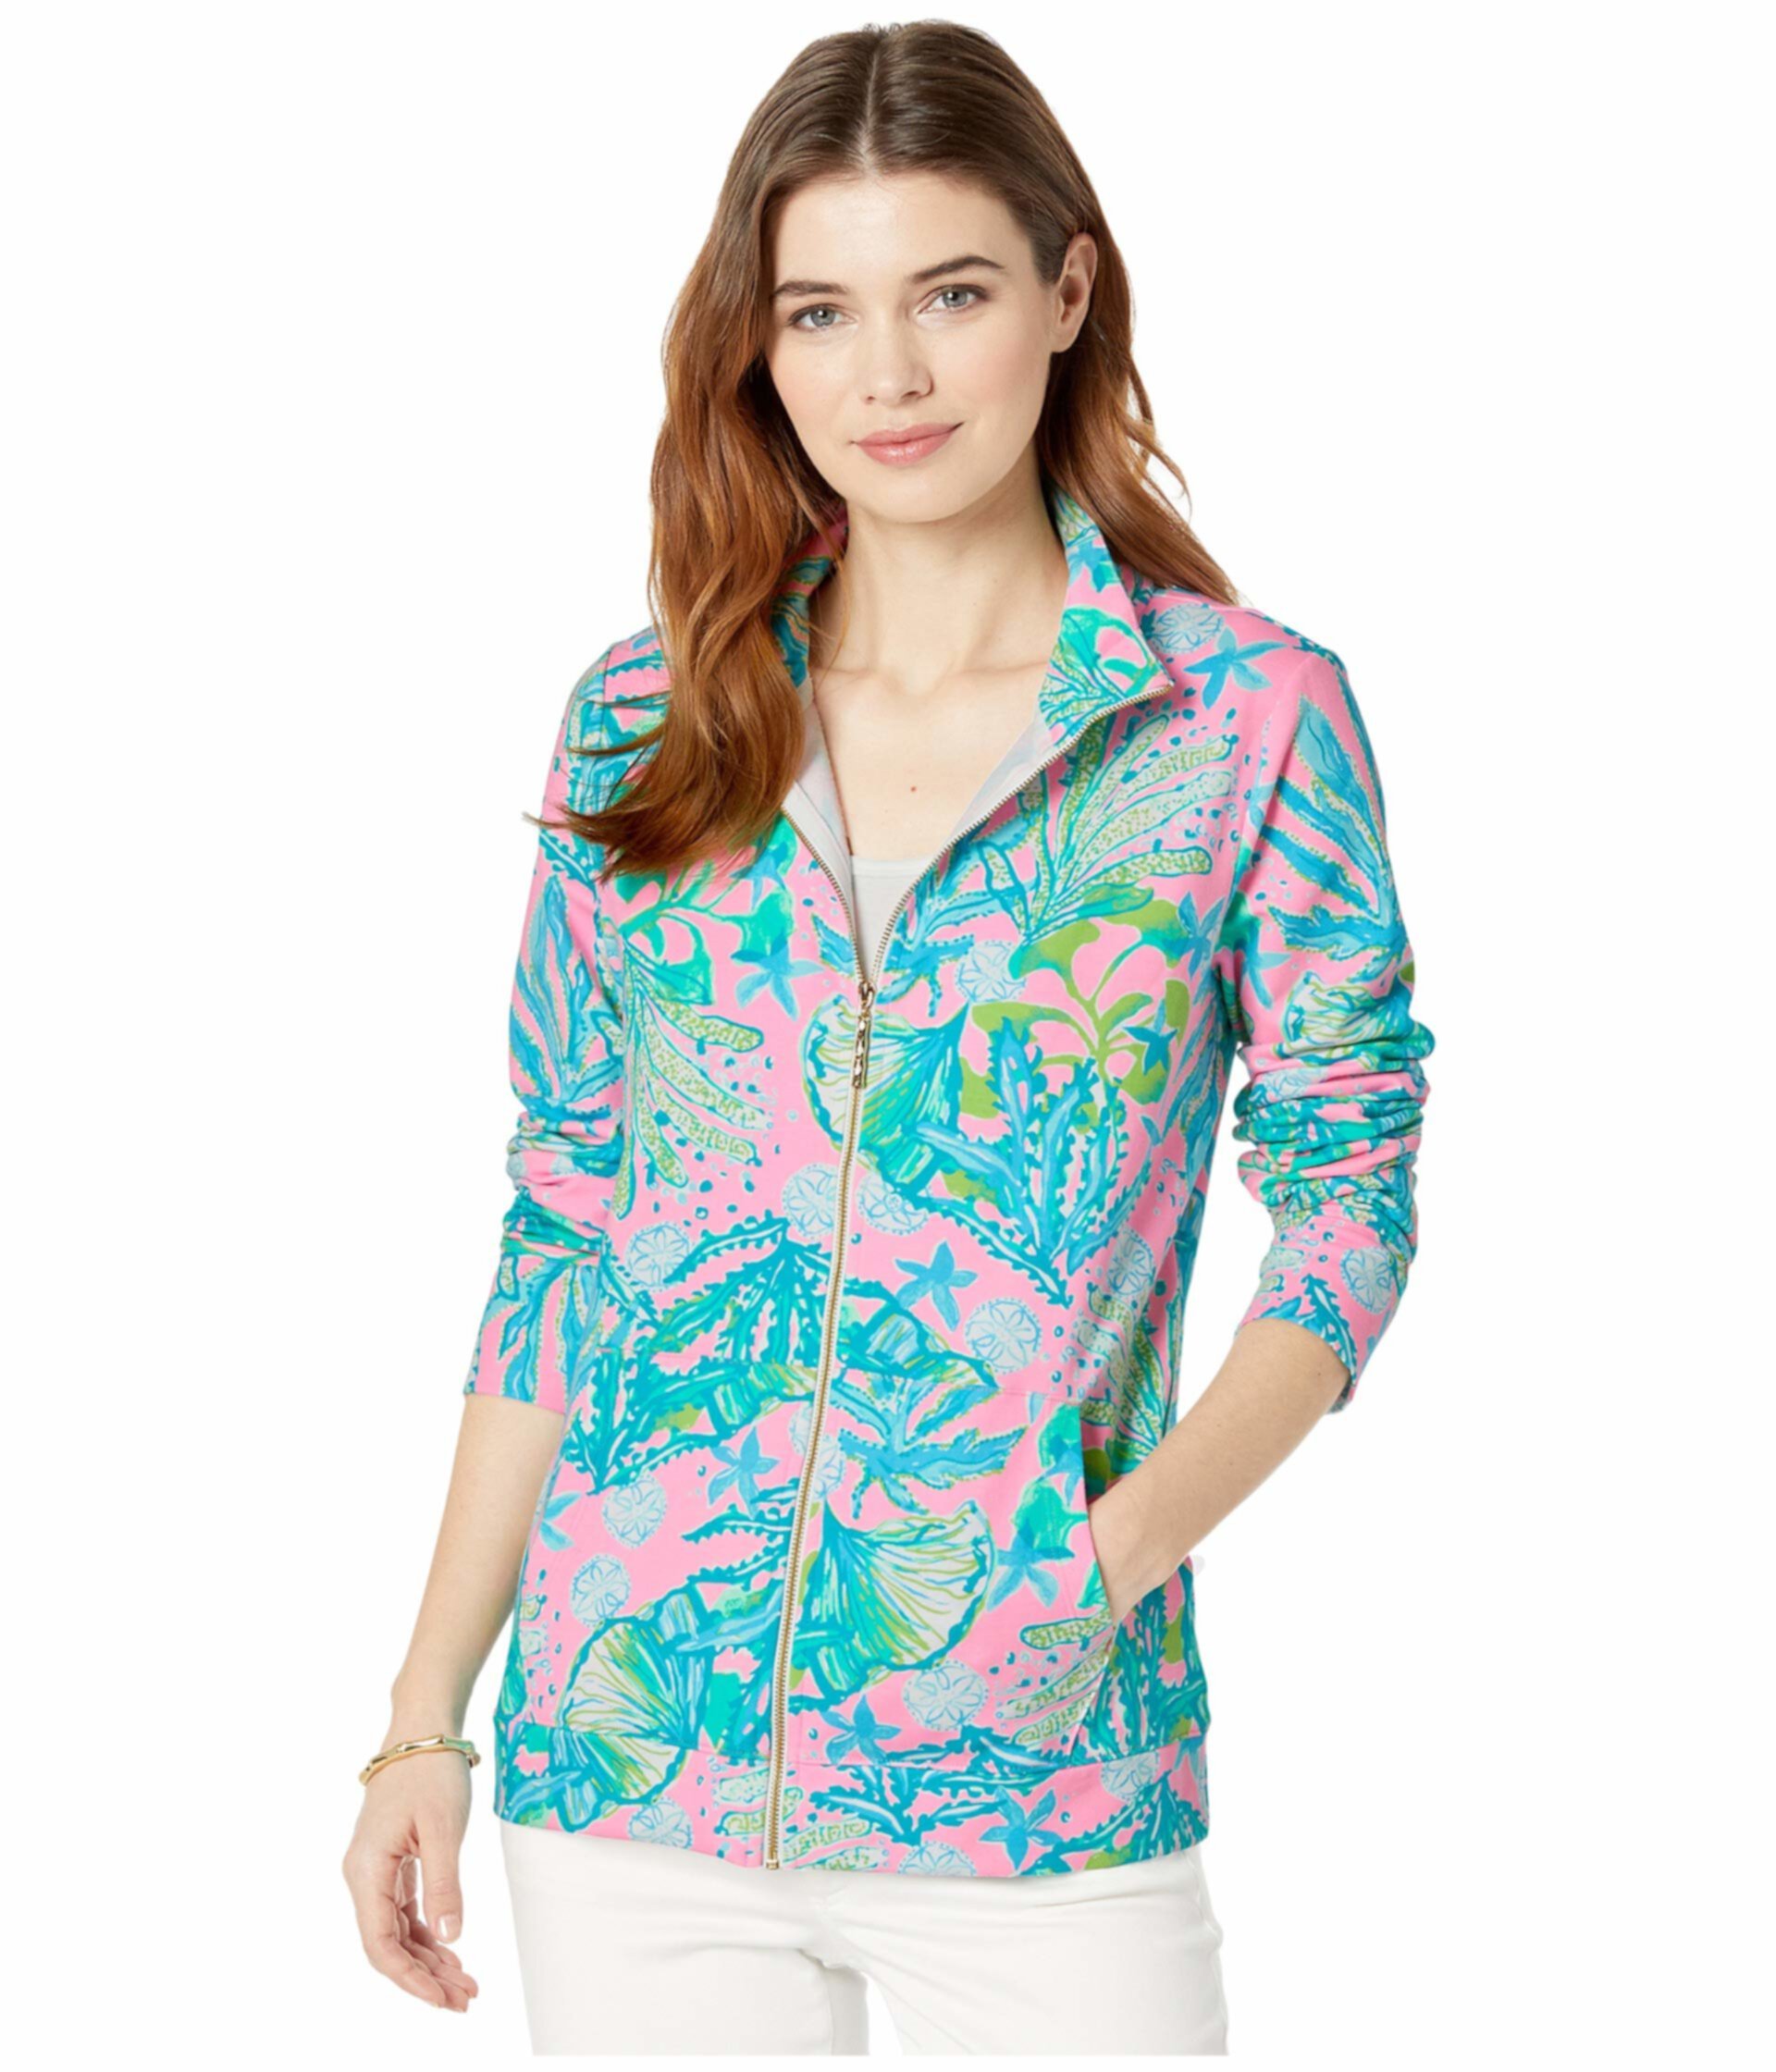 UPF 50+ Betsey Zip-Up Lilly Pulitzer